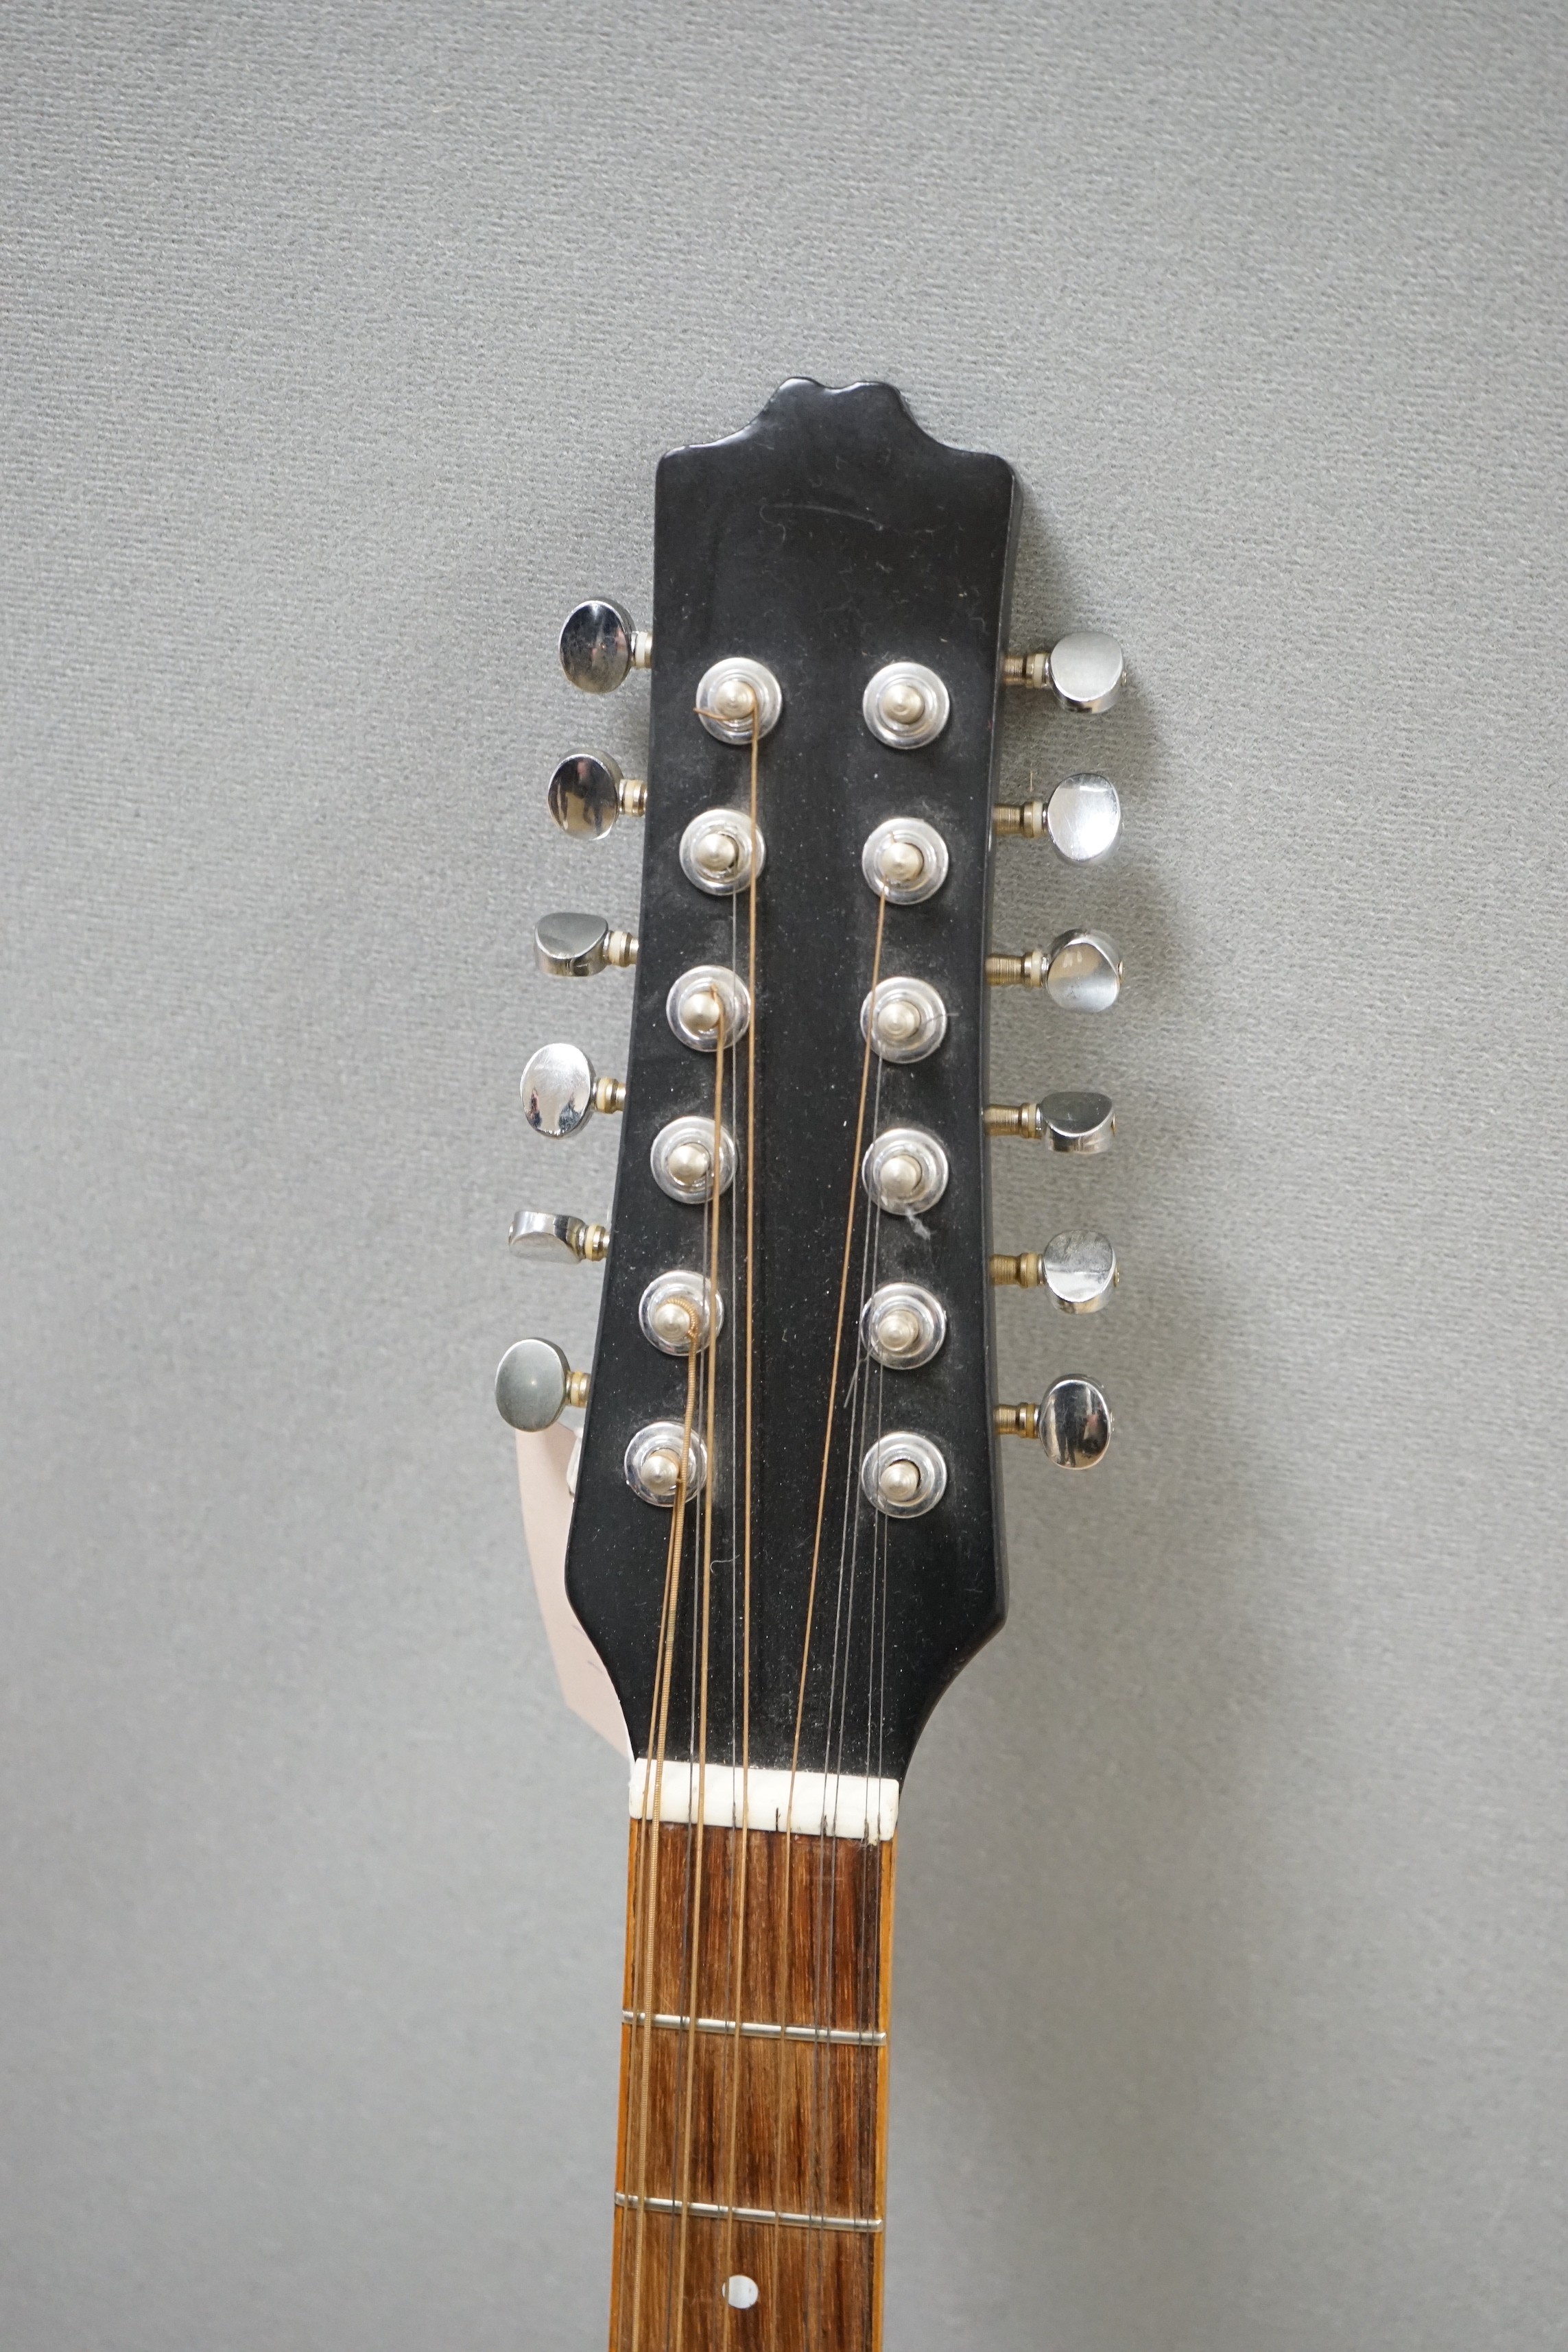 A 12 string acoustic guitar, unknown maker, repaired by John Degay of Degay Guitars